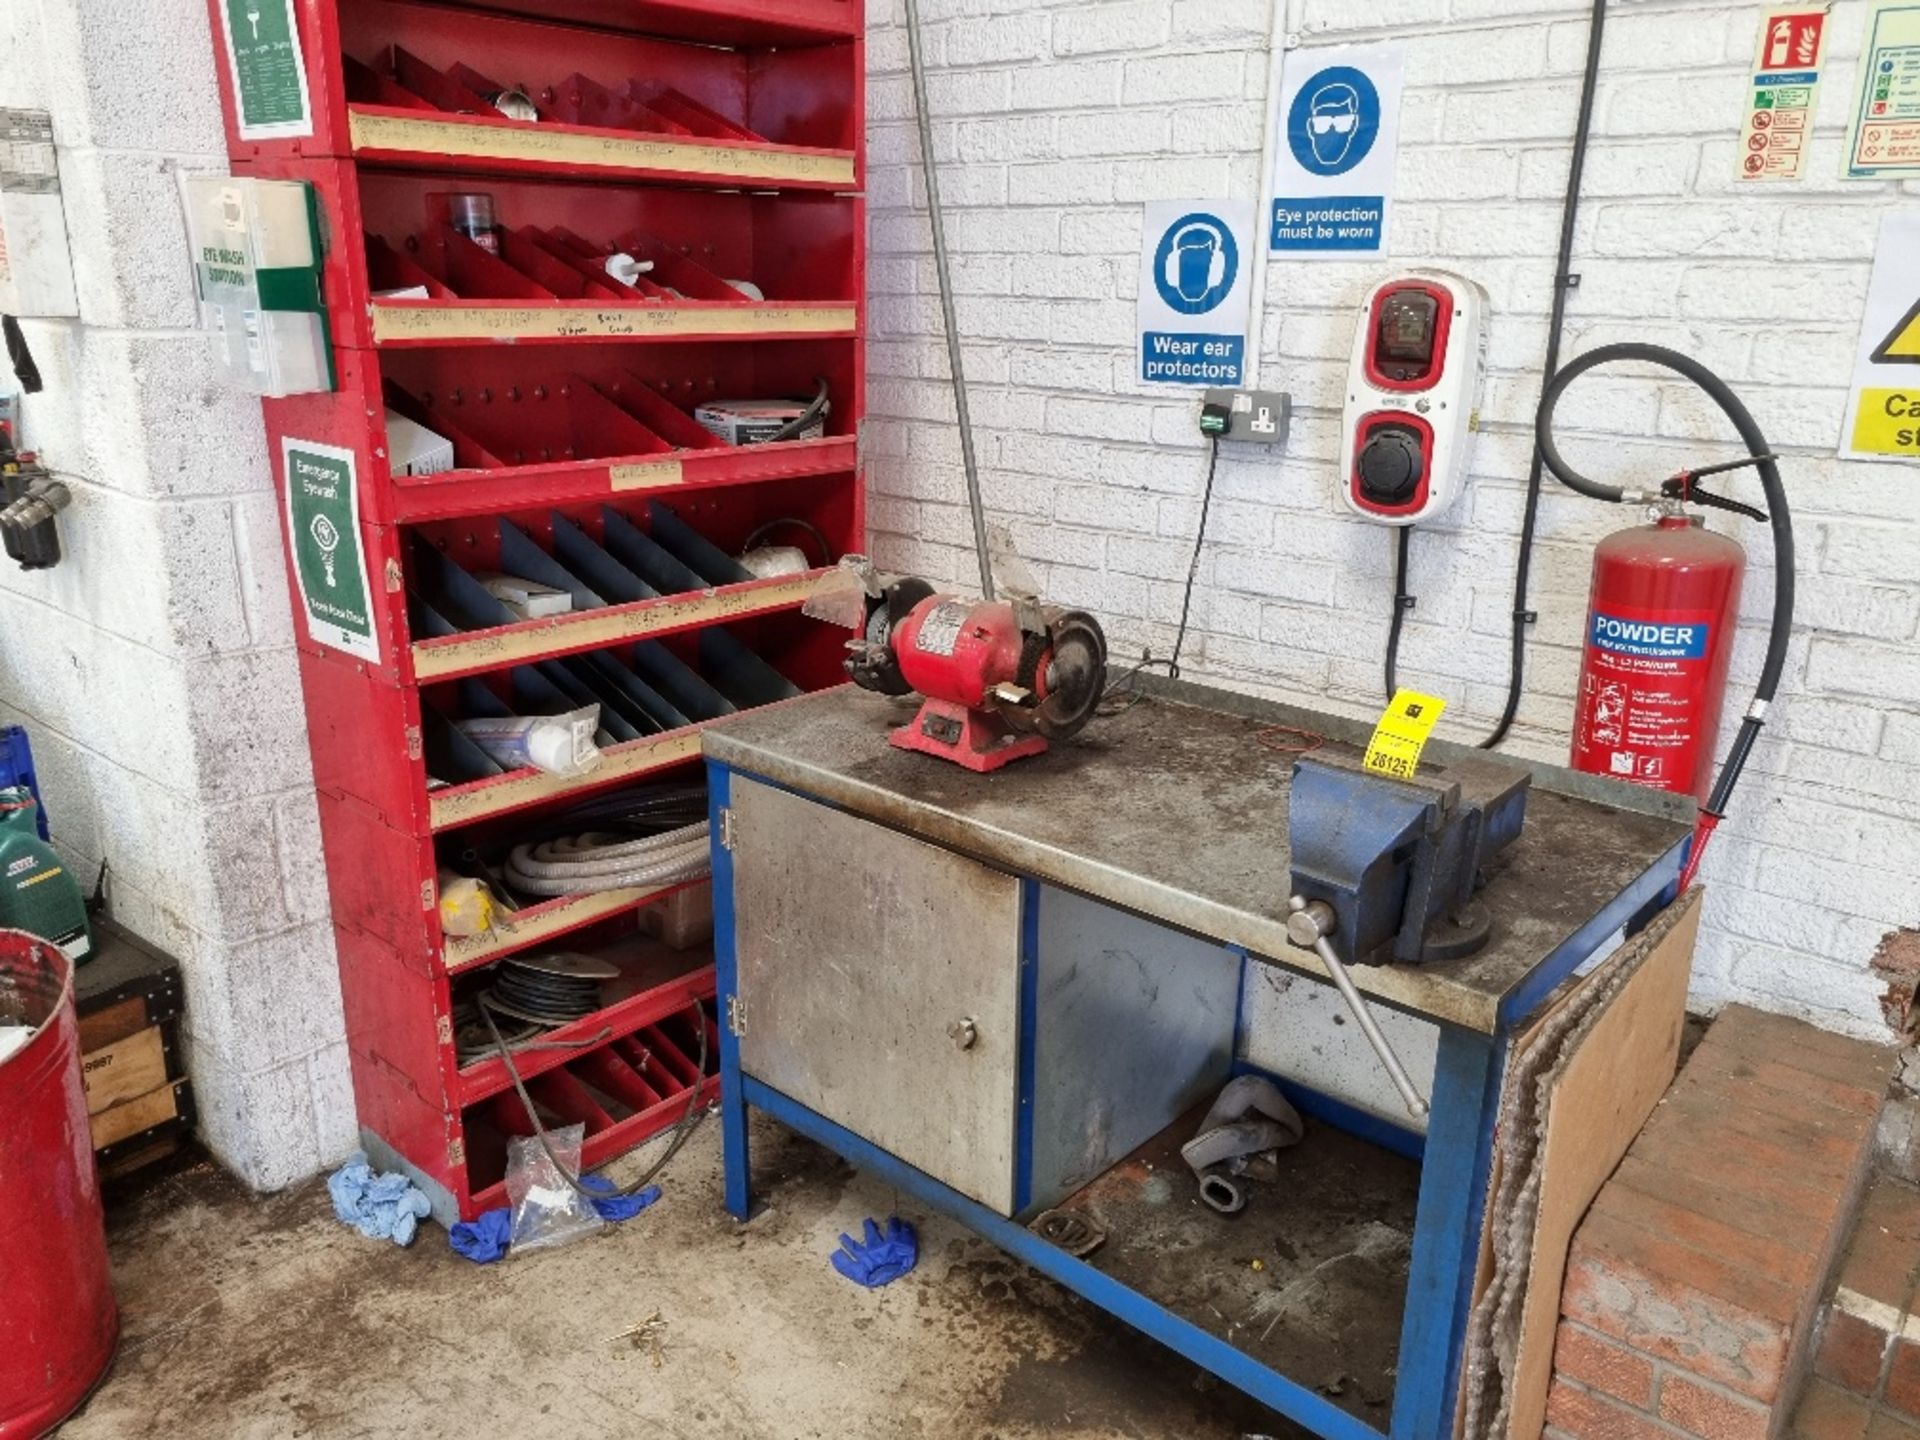 JAS STEEL TOP HEAVY DUTY WORKBENCH WITH DRAWER, VICE AND SEALEY BENCH GRINDER AND RED STEEL RACK